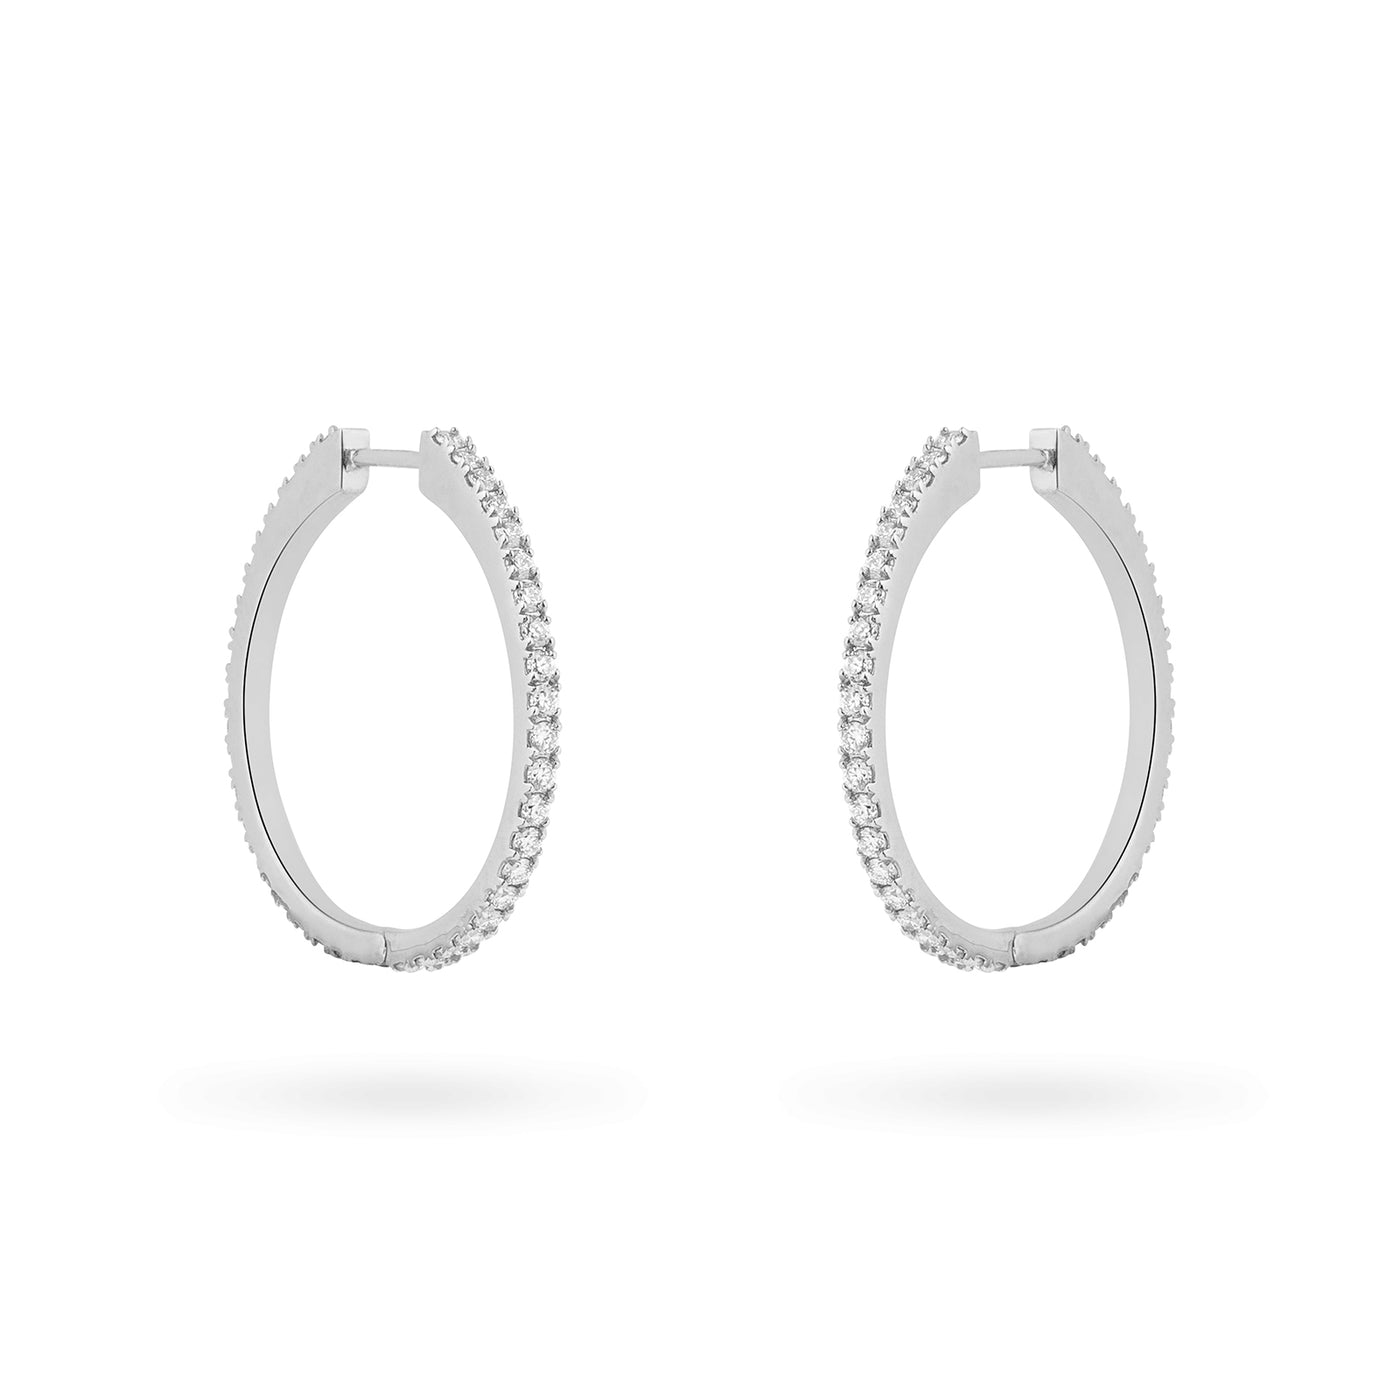 Continuous Hoops - Matilde Jewellery